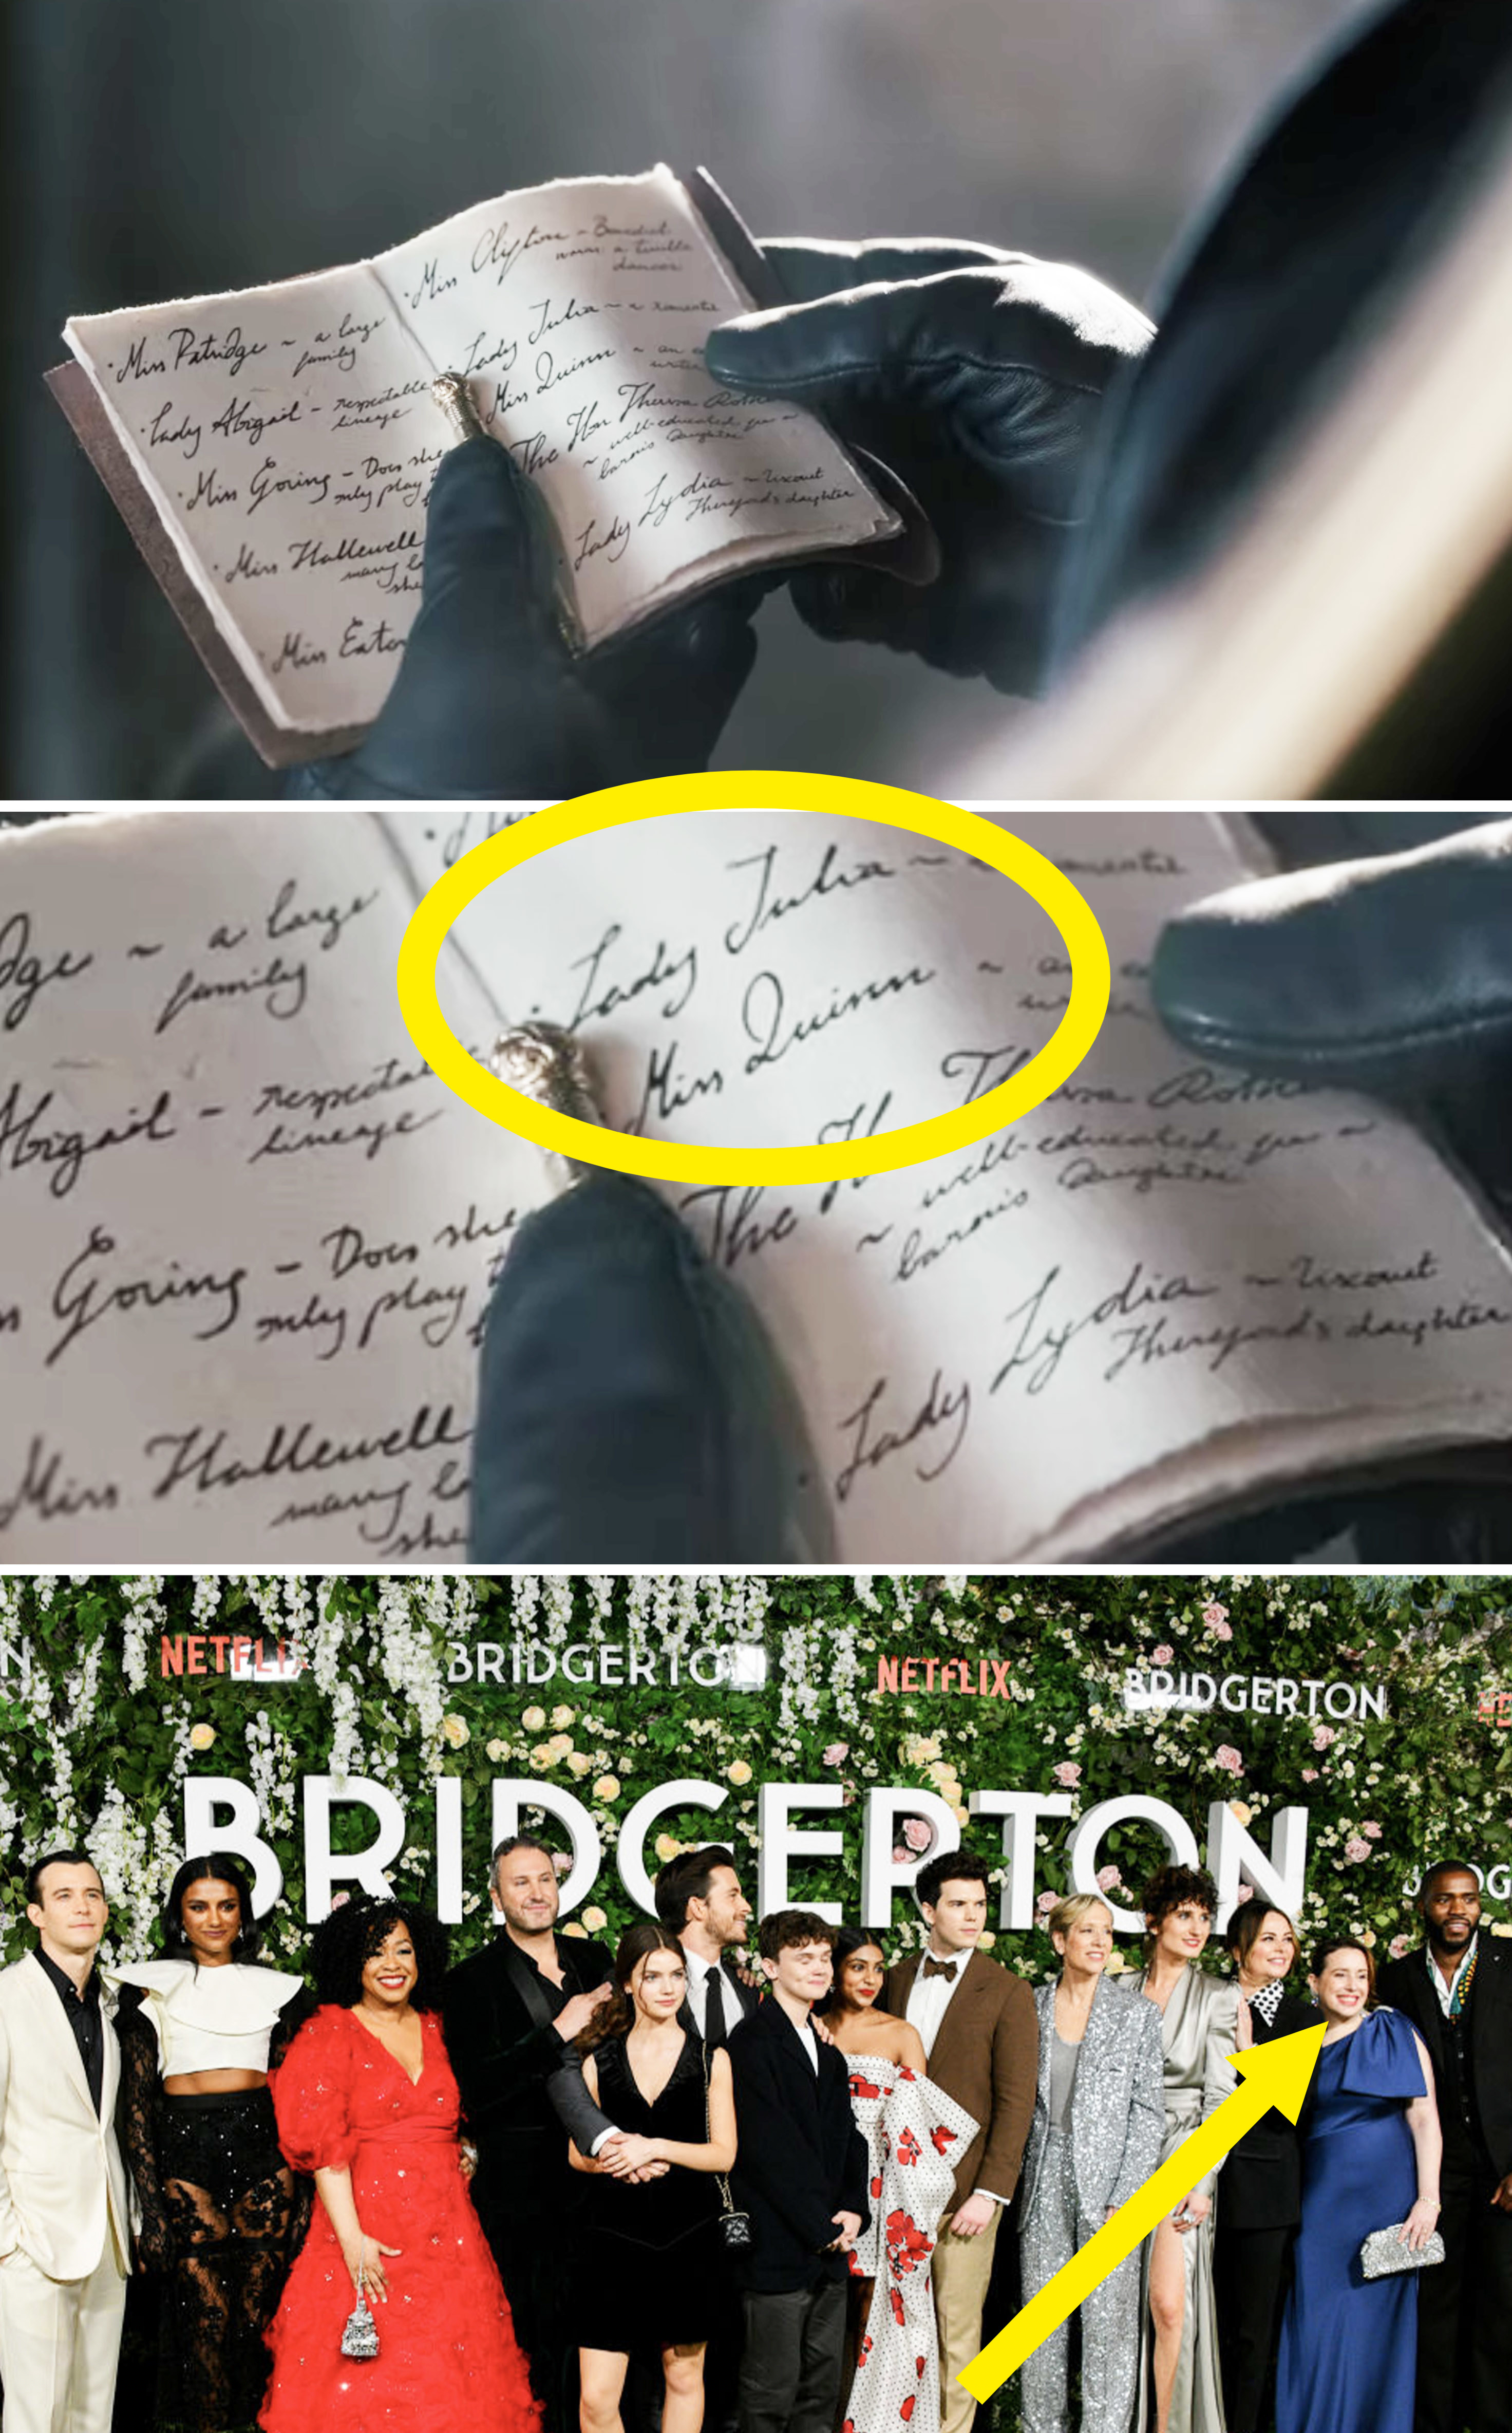 The list of women and a photo of the cast and crew of &quot;Bridgerton&quot; with an arrow pointing to the author Julia Quinn